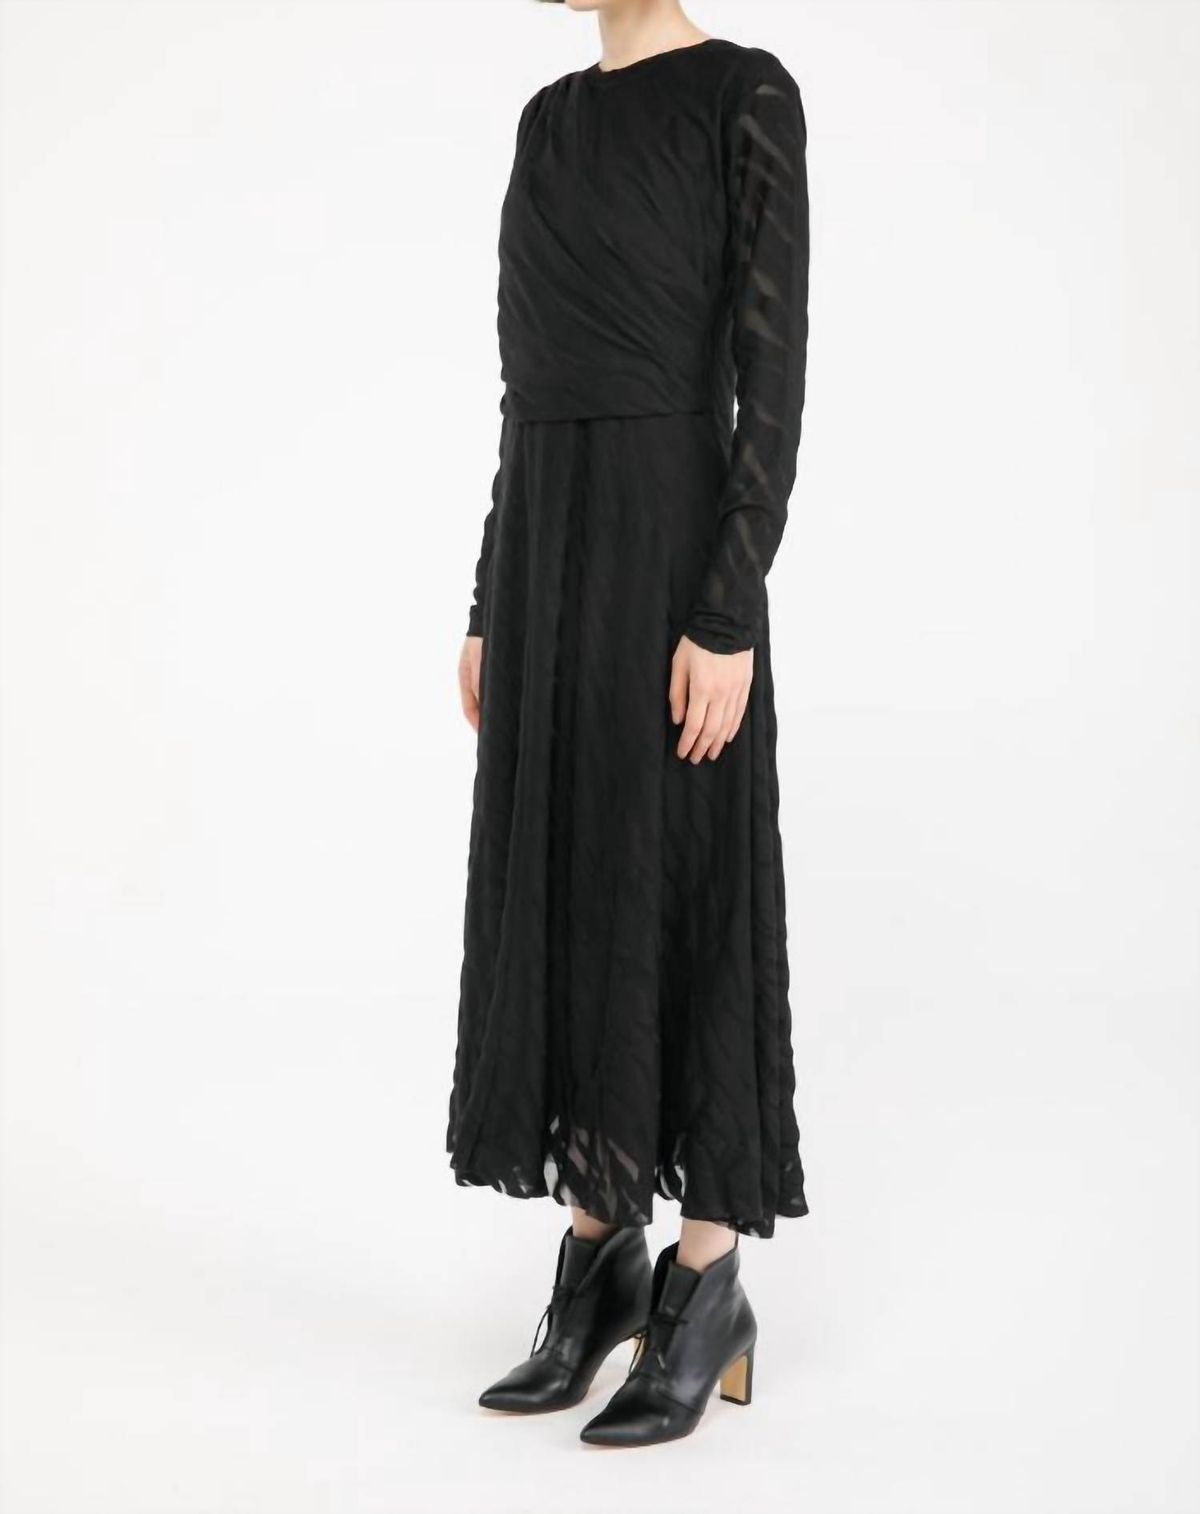 Style 1-3852851470-3855 ISLE by Melis Kozan Size XS Long Sleeve Sheer Black Cocktail Dress on Queenly